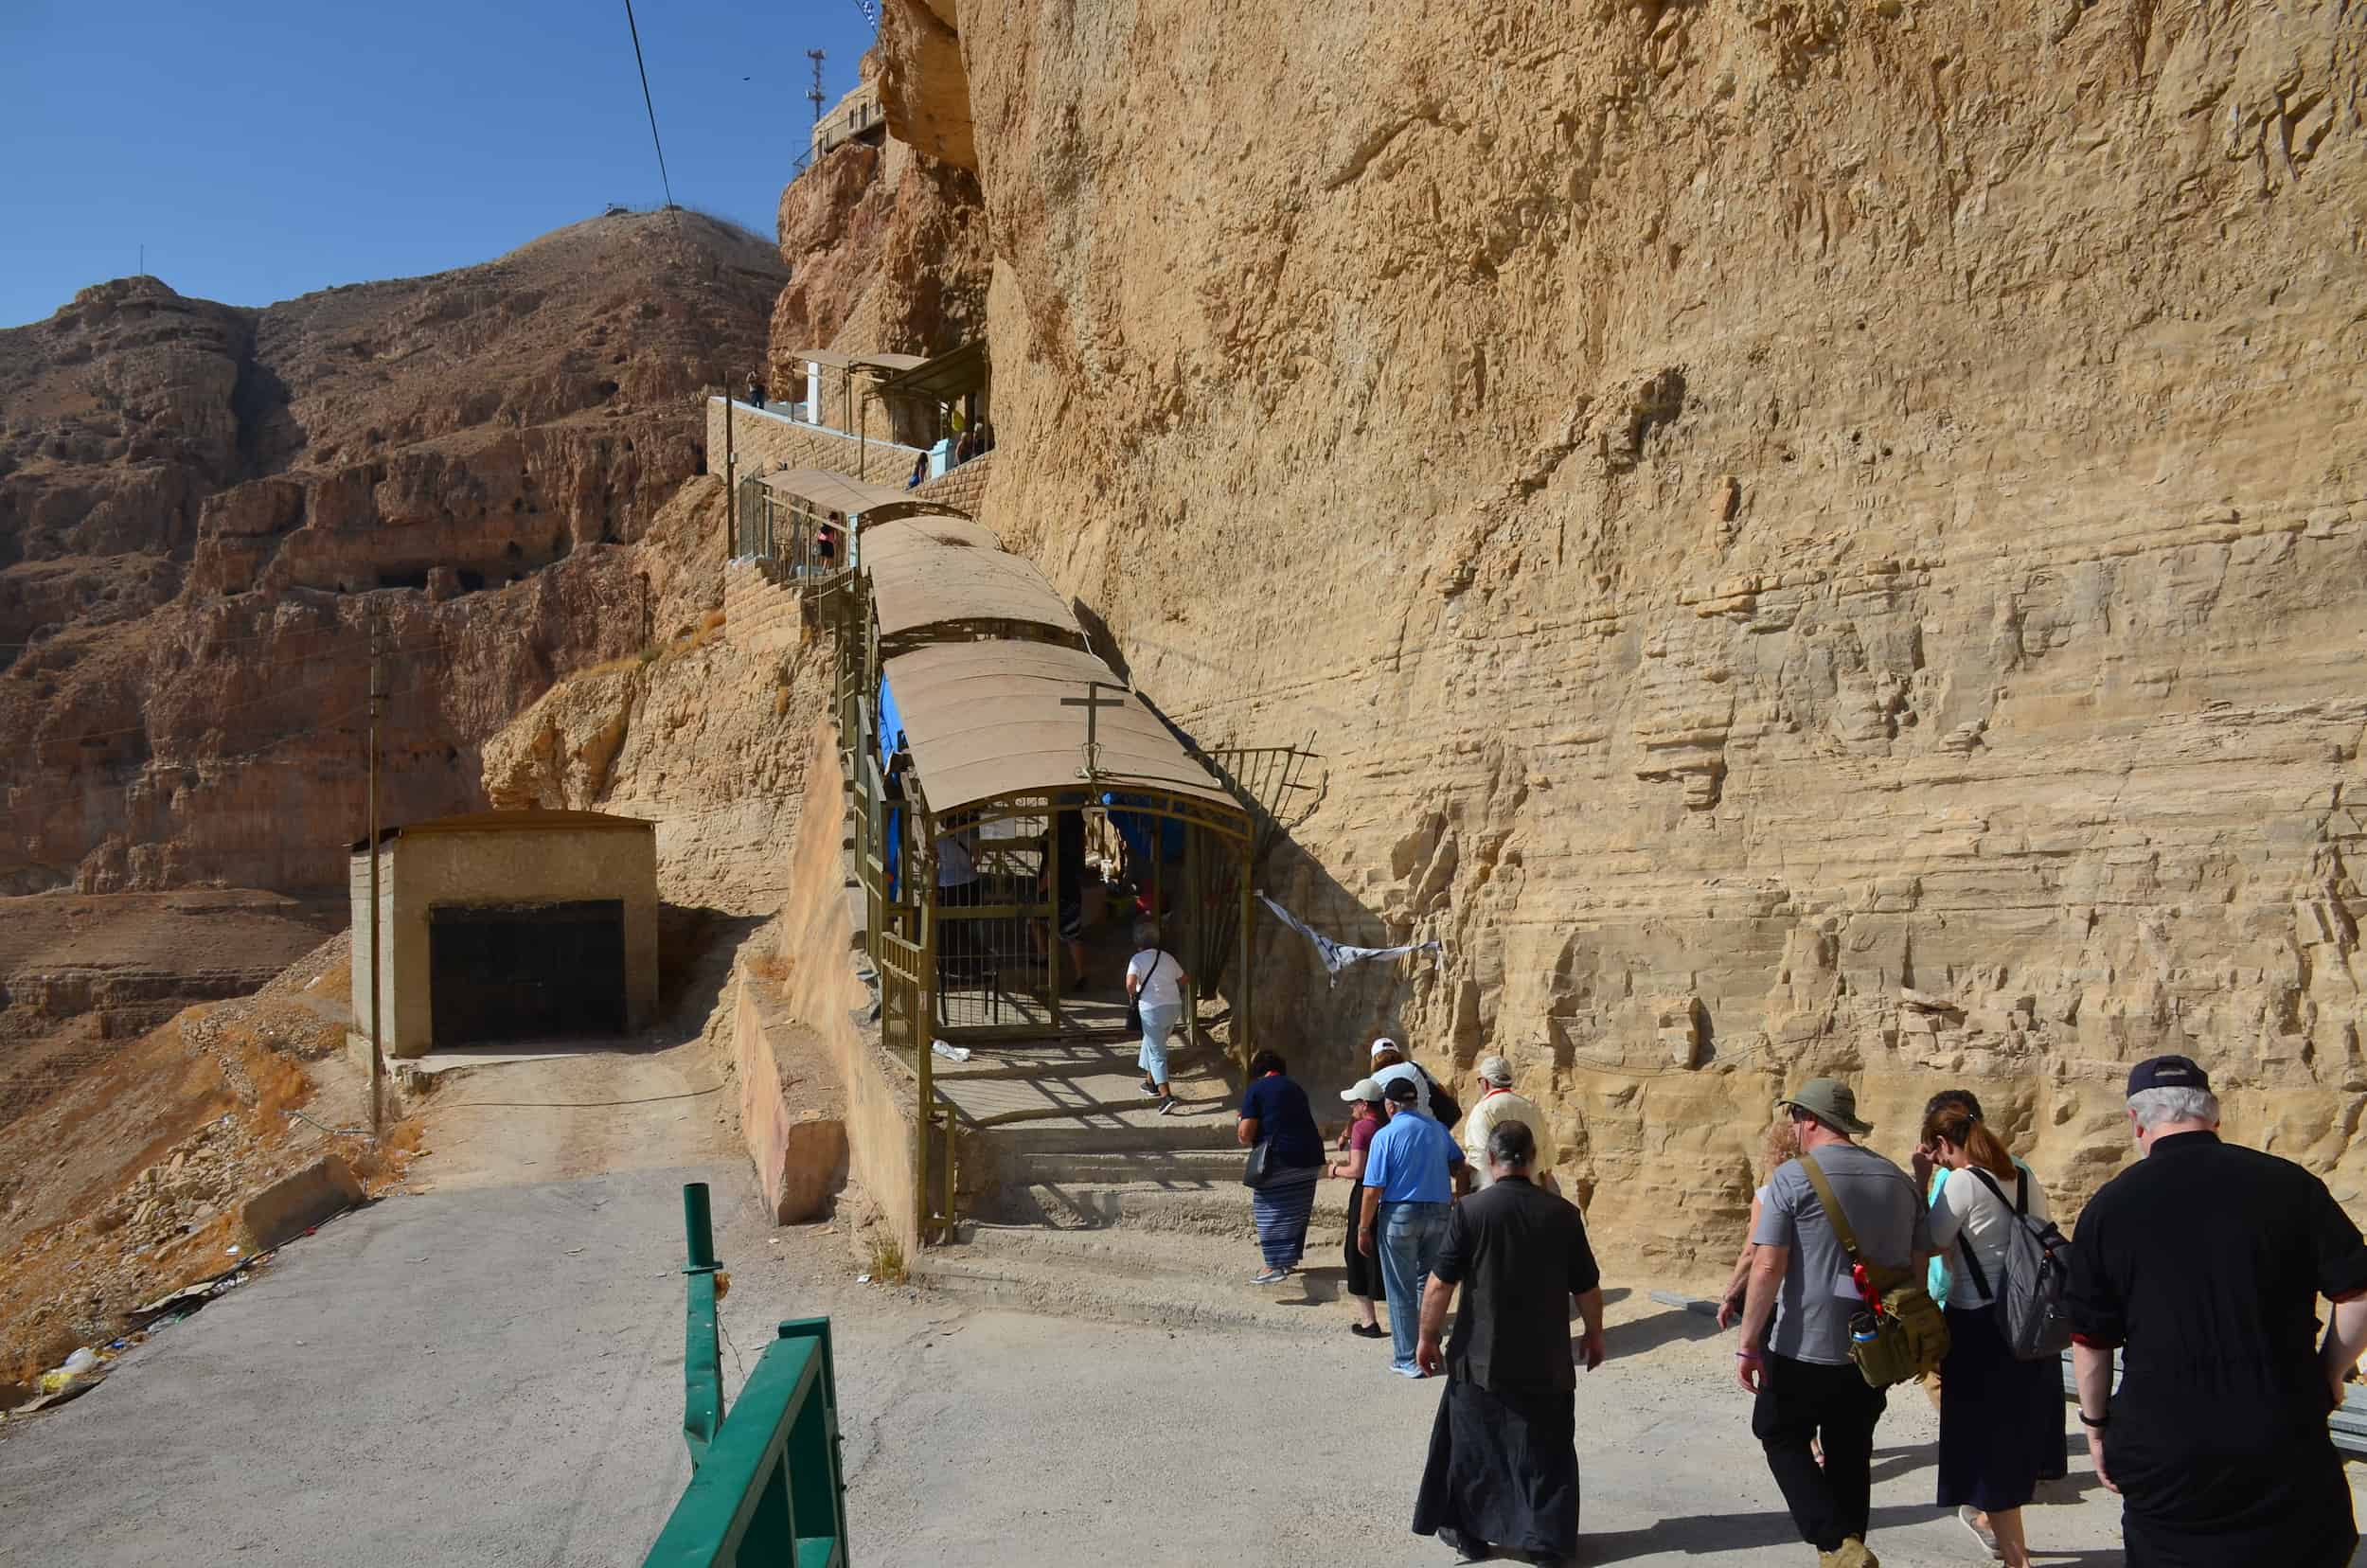 Path up to the gate of the monastery at the Monastery of the Temptation in Jericho, Palestine